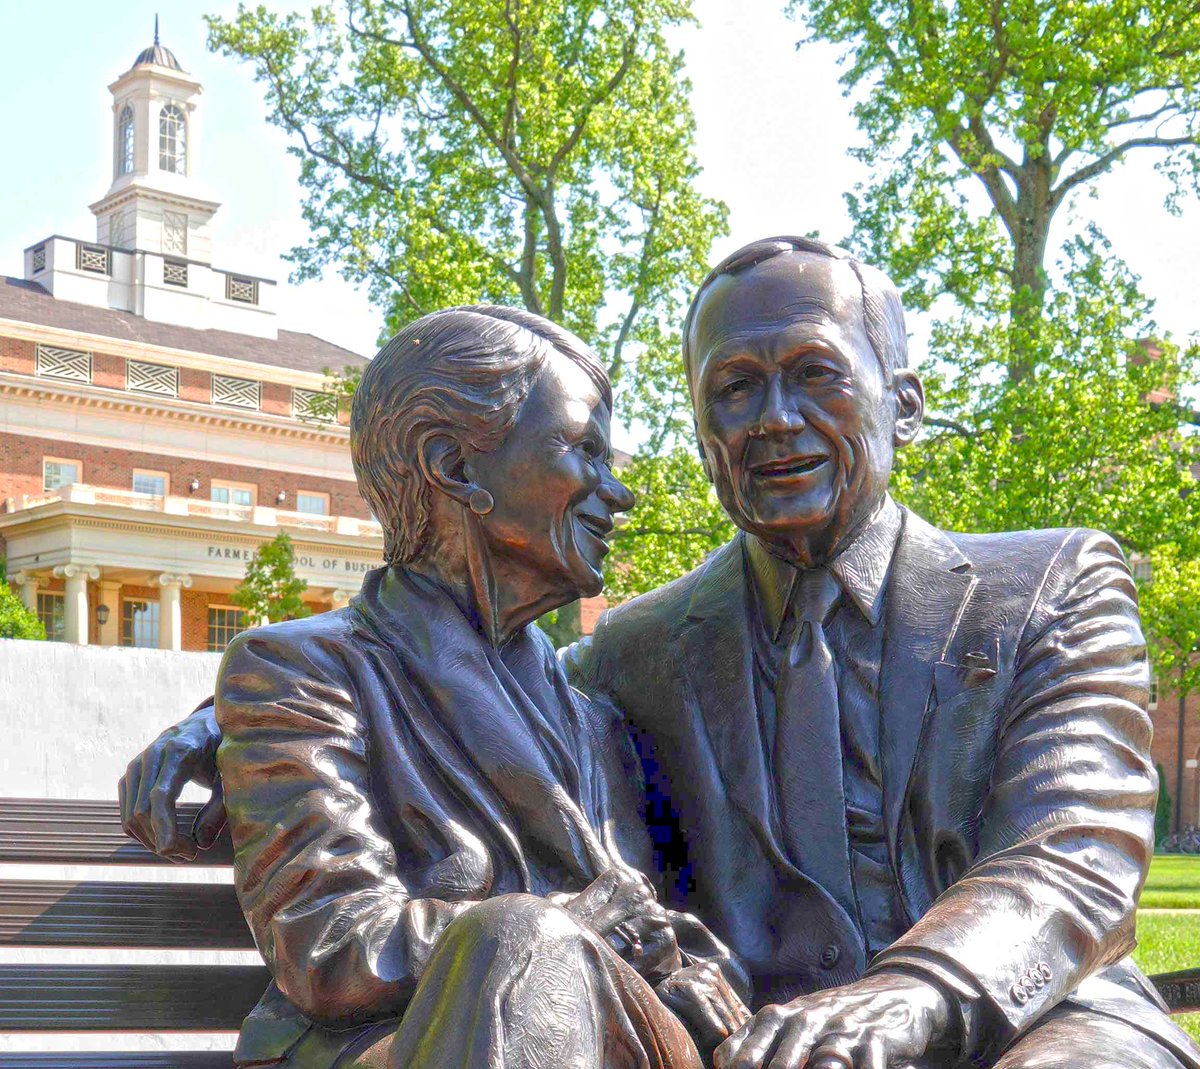 The Farmer Family Sculpture Park at the @FarmerSchoolMU was dedicated this morning, featuring a bronze sculpture of Richard (Dick) and Joyce Farmer. Richard T. Farmer, founder of the Cintas Corporation, gave the business school its name. #MyFSB #BeyondReady #MiamiOH